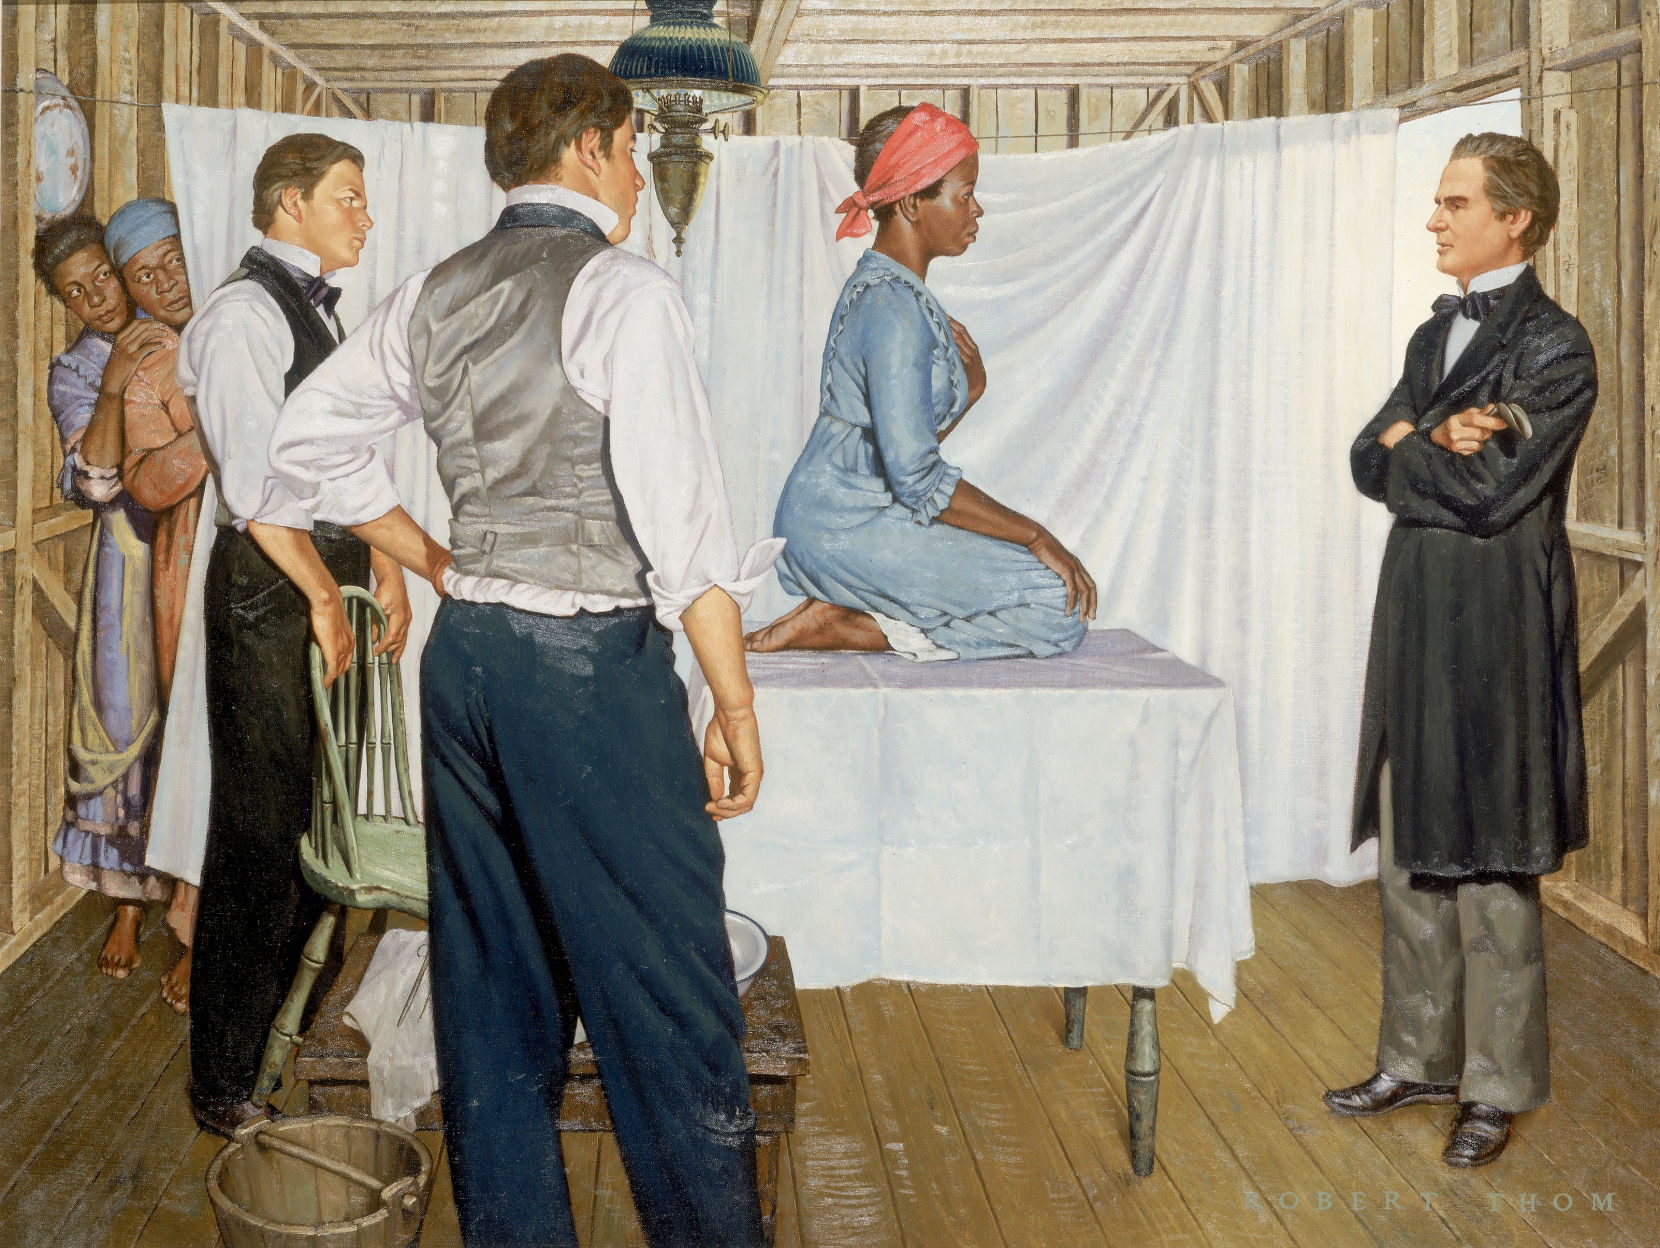 Illustration of Dr. J. Marion Sims with Anarcha by Robert Thom. Courtesy of Southern Illinois University School of Medicine, Pearson Museum.